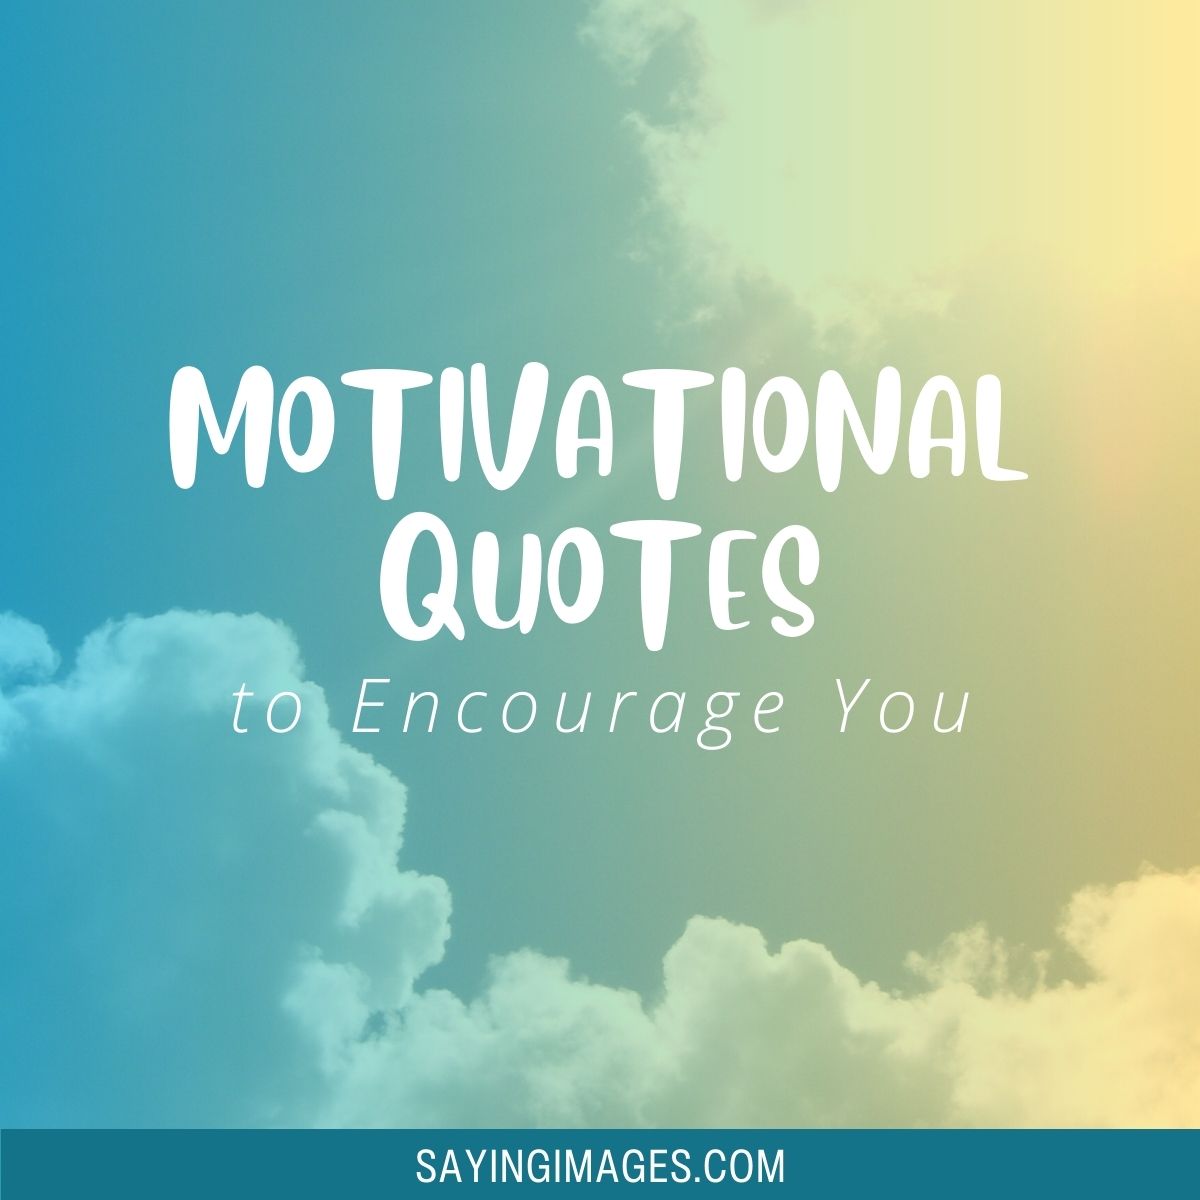 70 Motivational Quotes to Encourage You